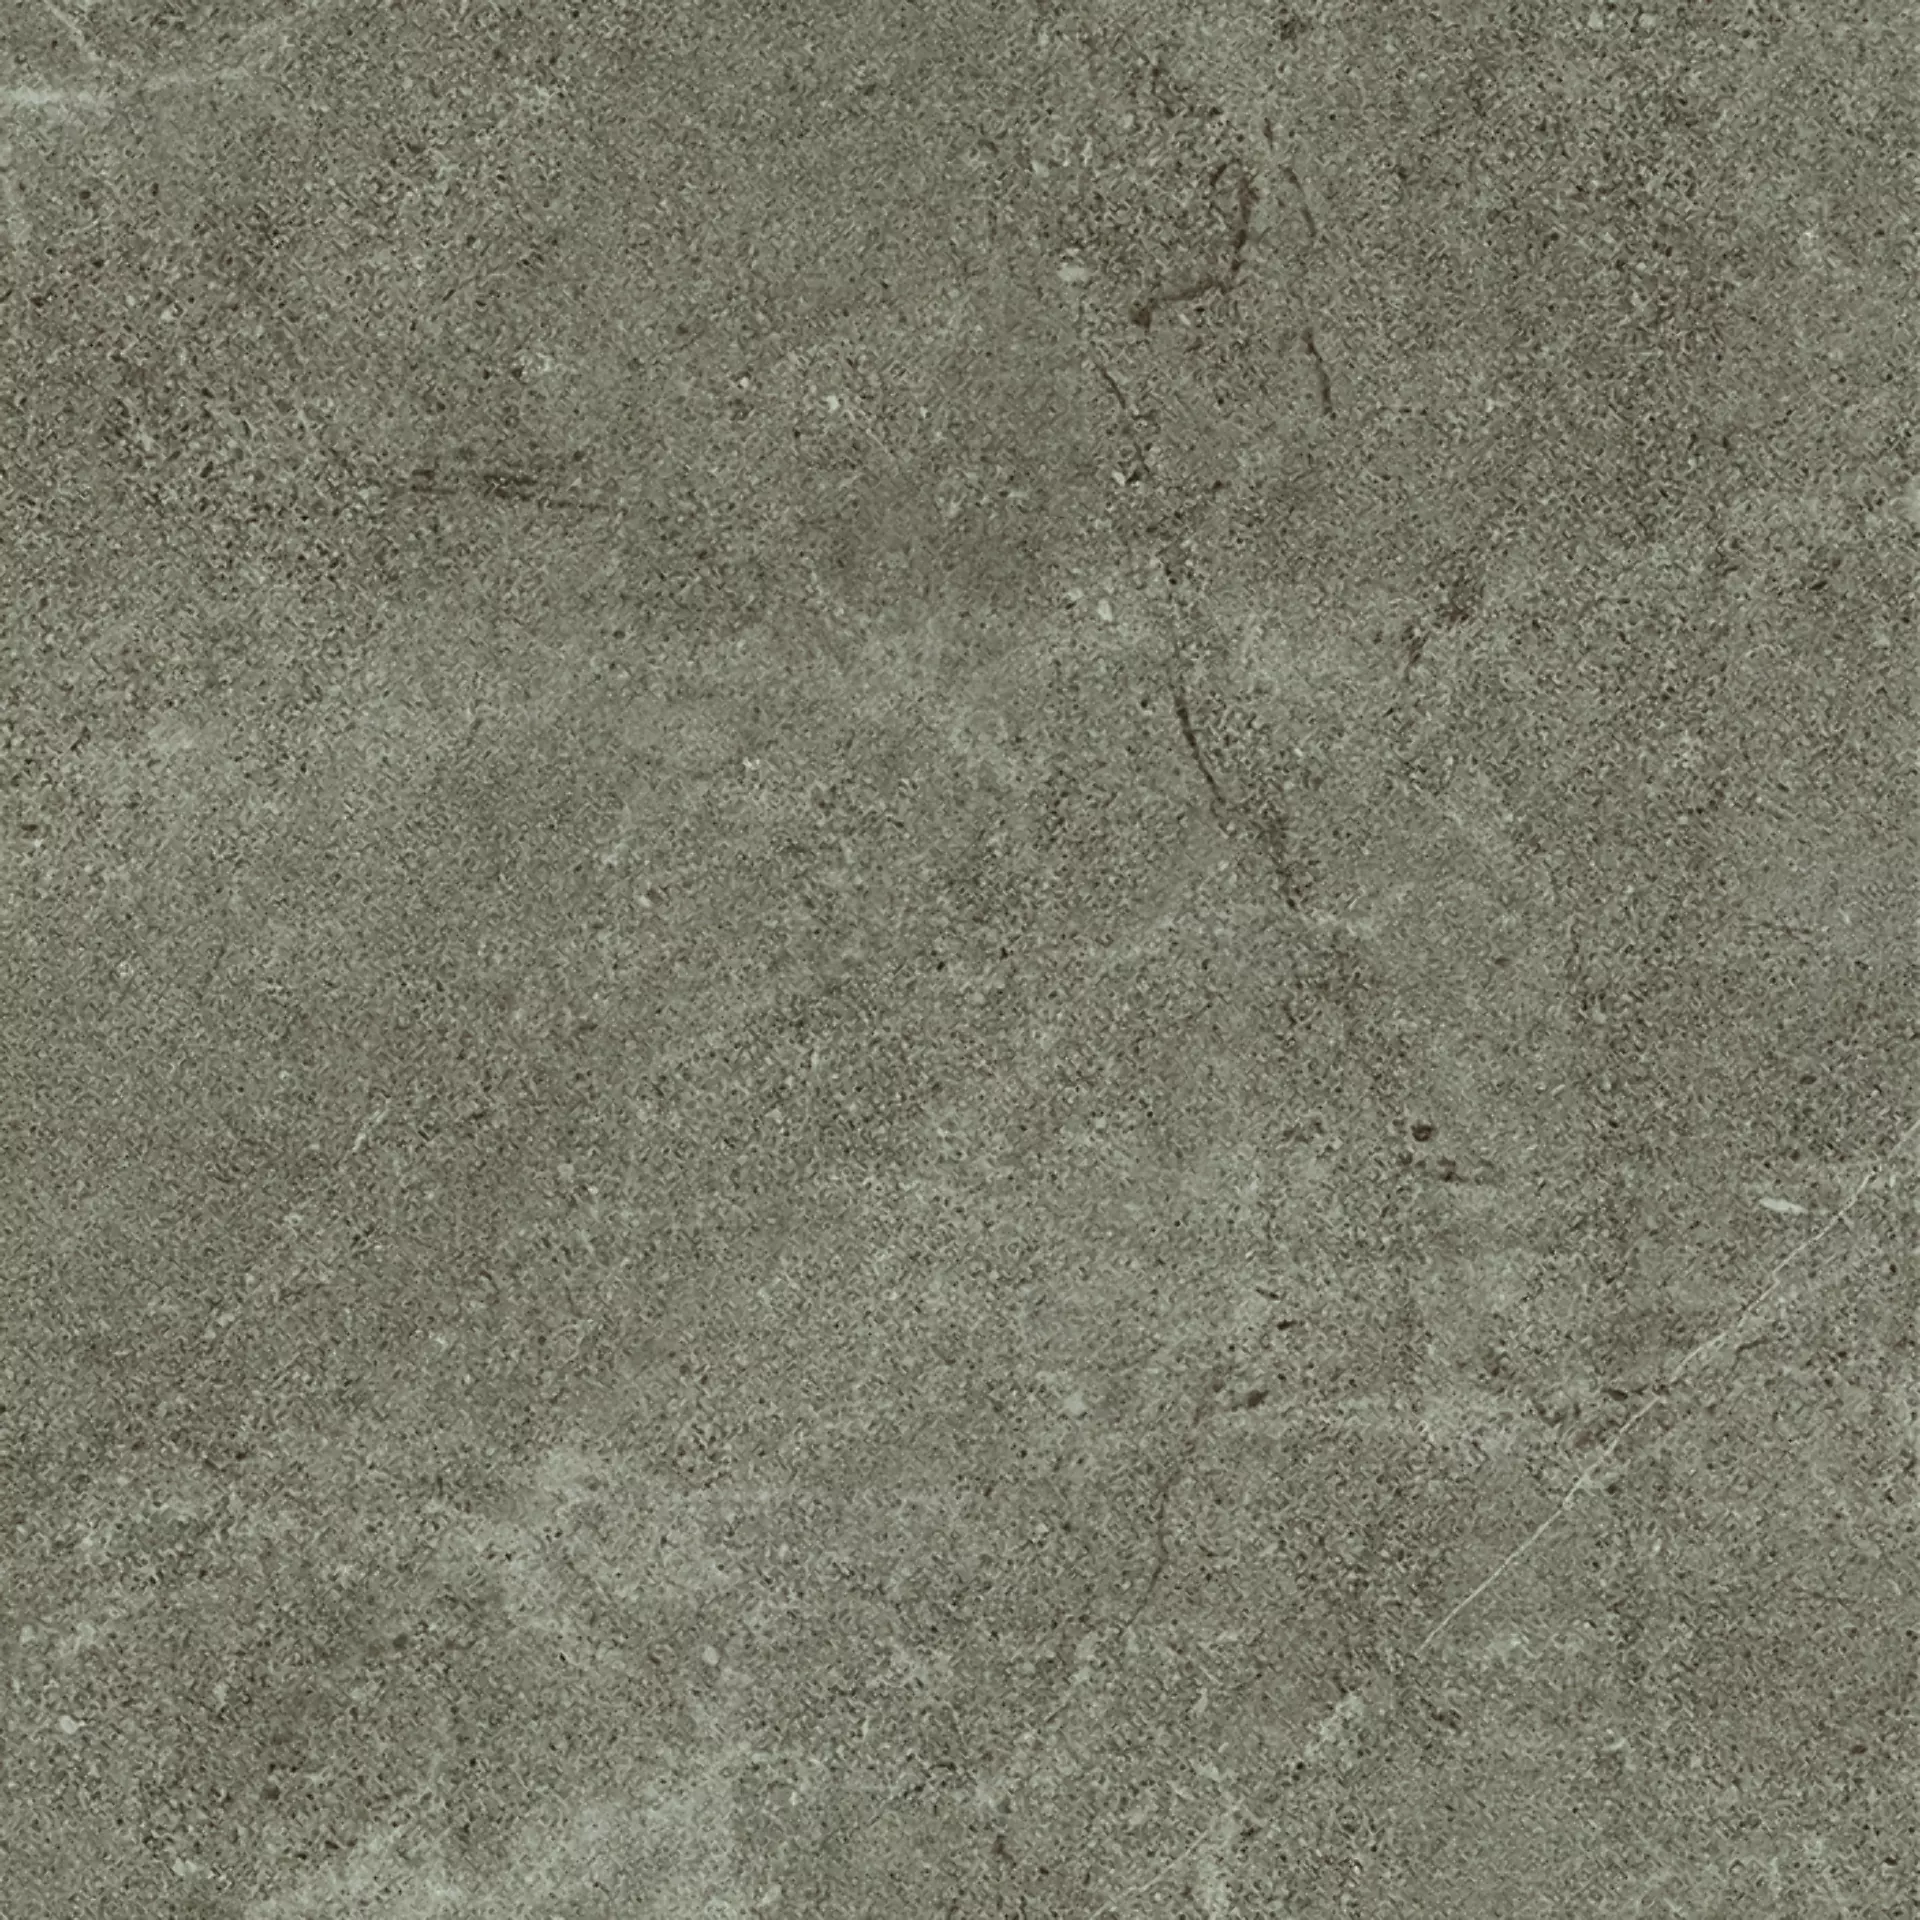 Cercom Archistone Taupe Naturale 1081749 100x100cm rectified 8,5mm